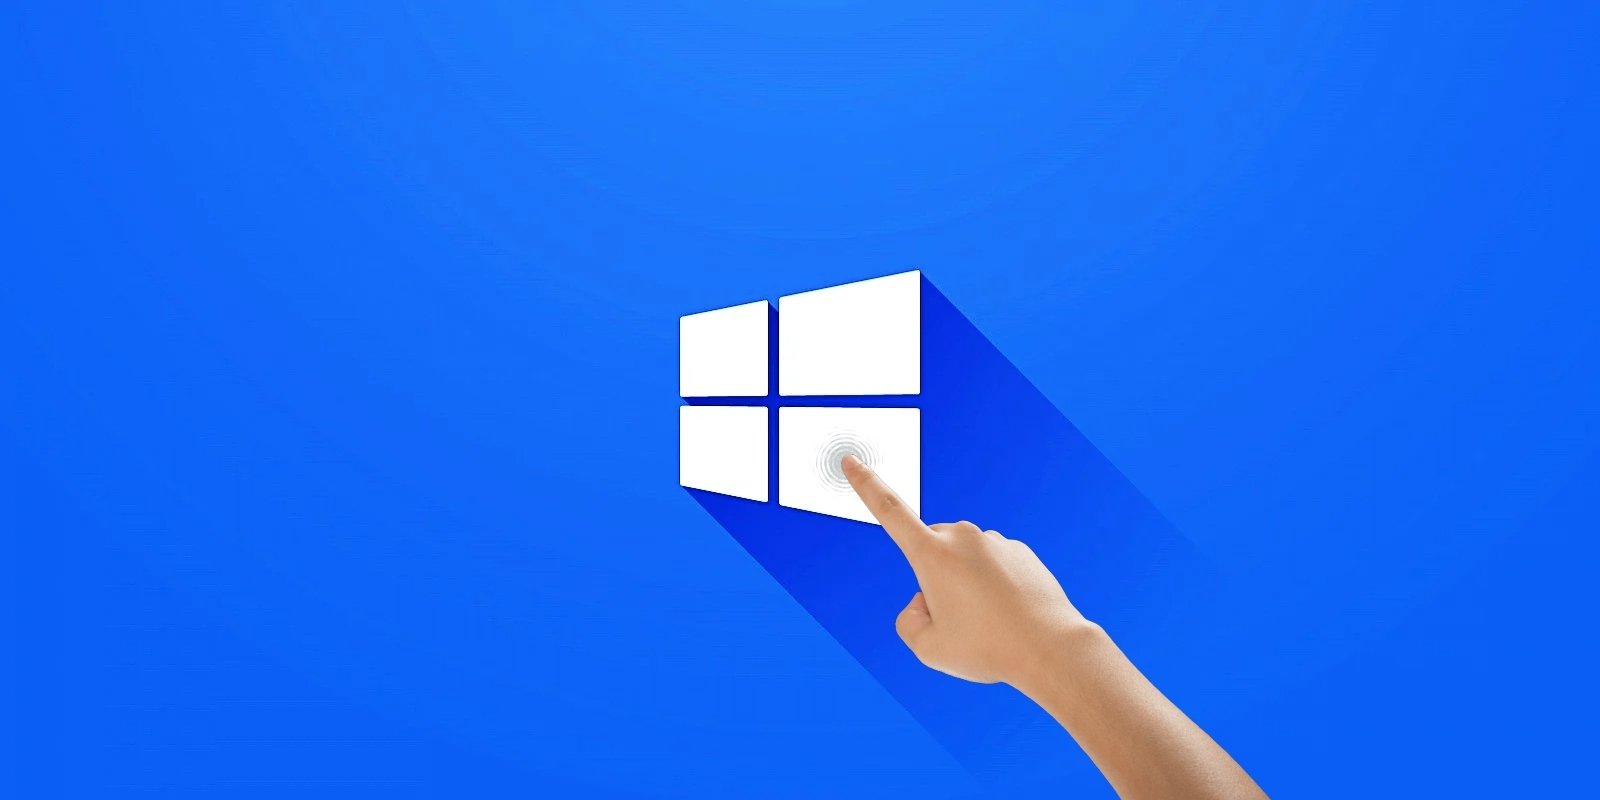 Windows Finger command abused by phishing to download malware